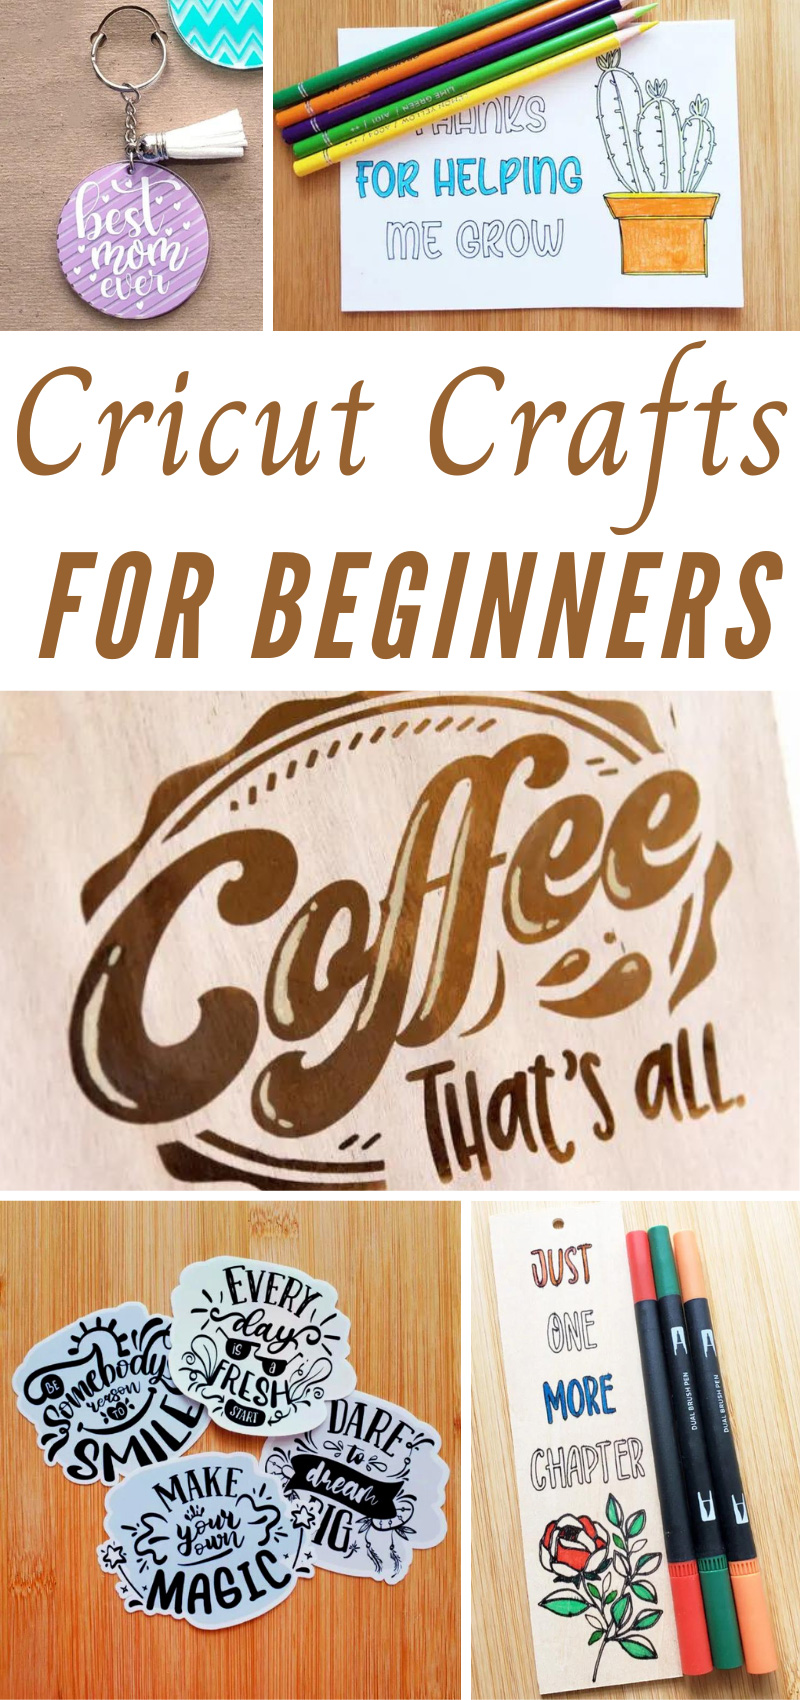 11 Great Cricut Projects with Cardstock You Can Make - Simply